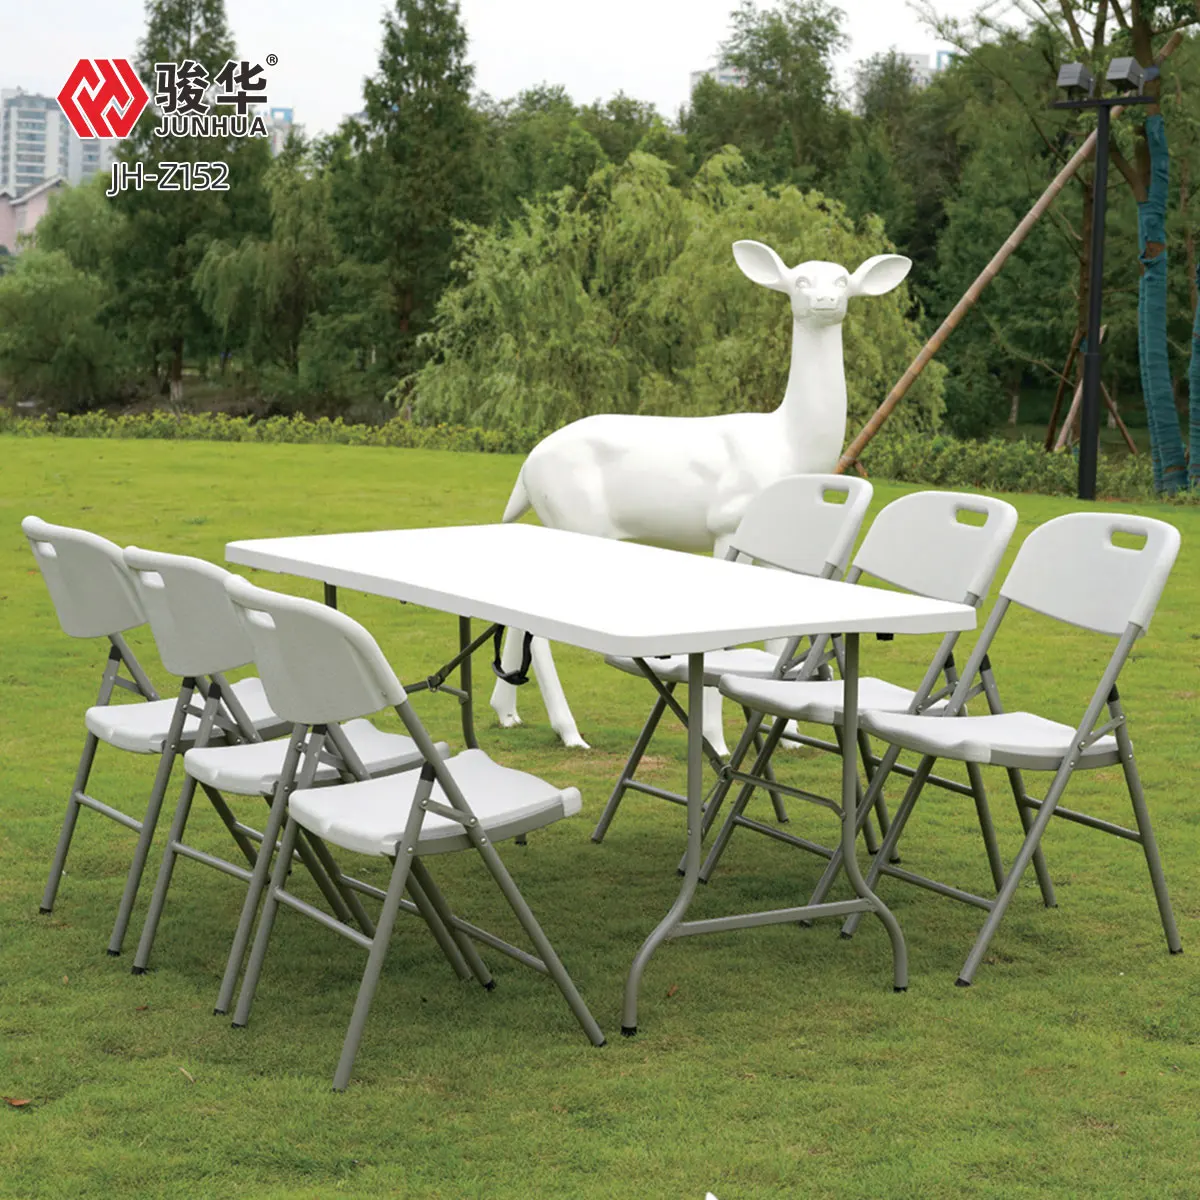 Wholesale Price Outdoor 5 ft Plastic Folding Table for Wedding Party Banquet Events